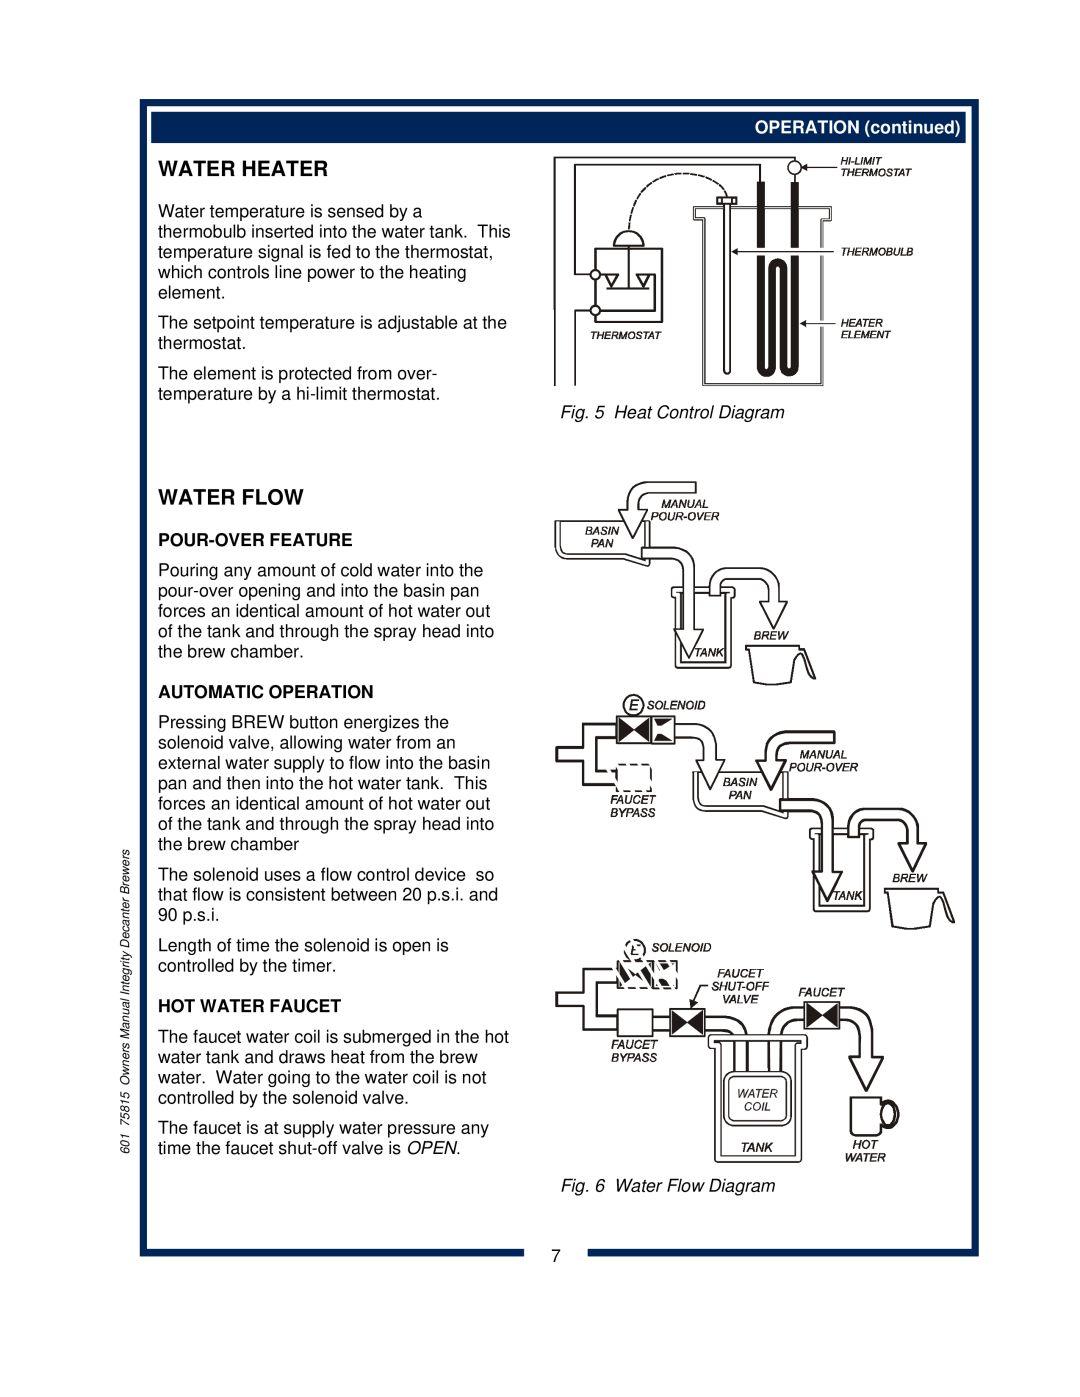 Bloomfield 9010 Water Heater, Water Flow, OPERATION continued, Heat Control Diagram, Pour-Overfeature, Automatic Operation 